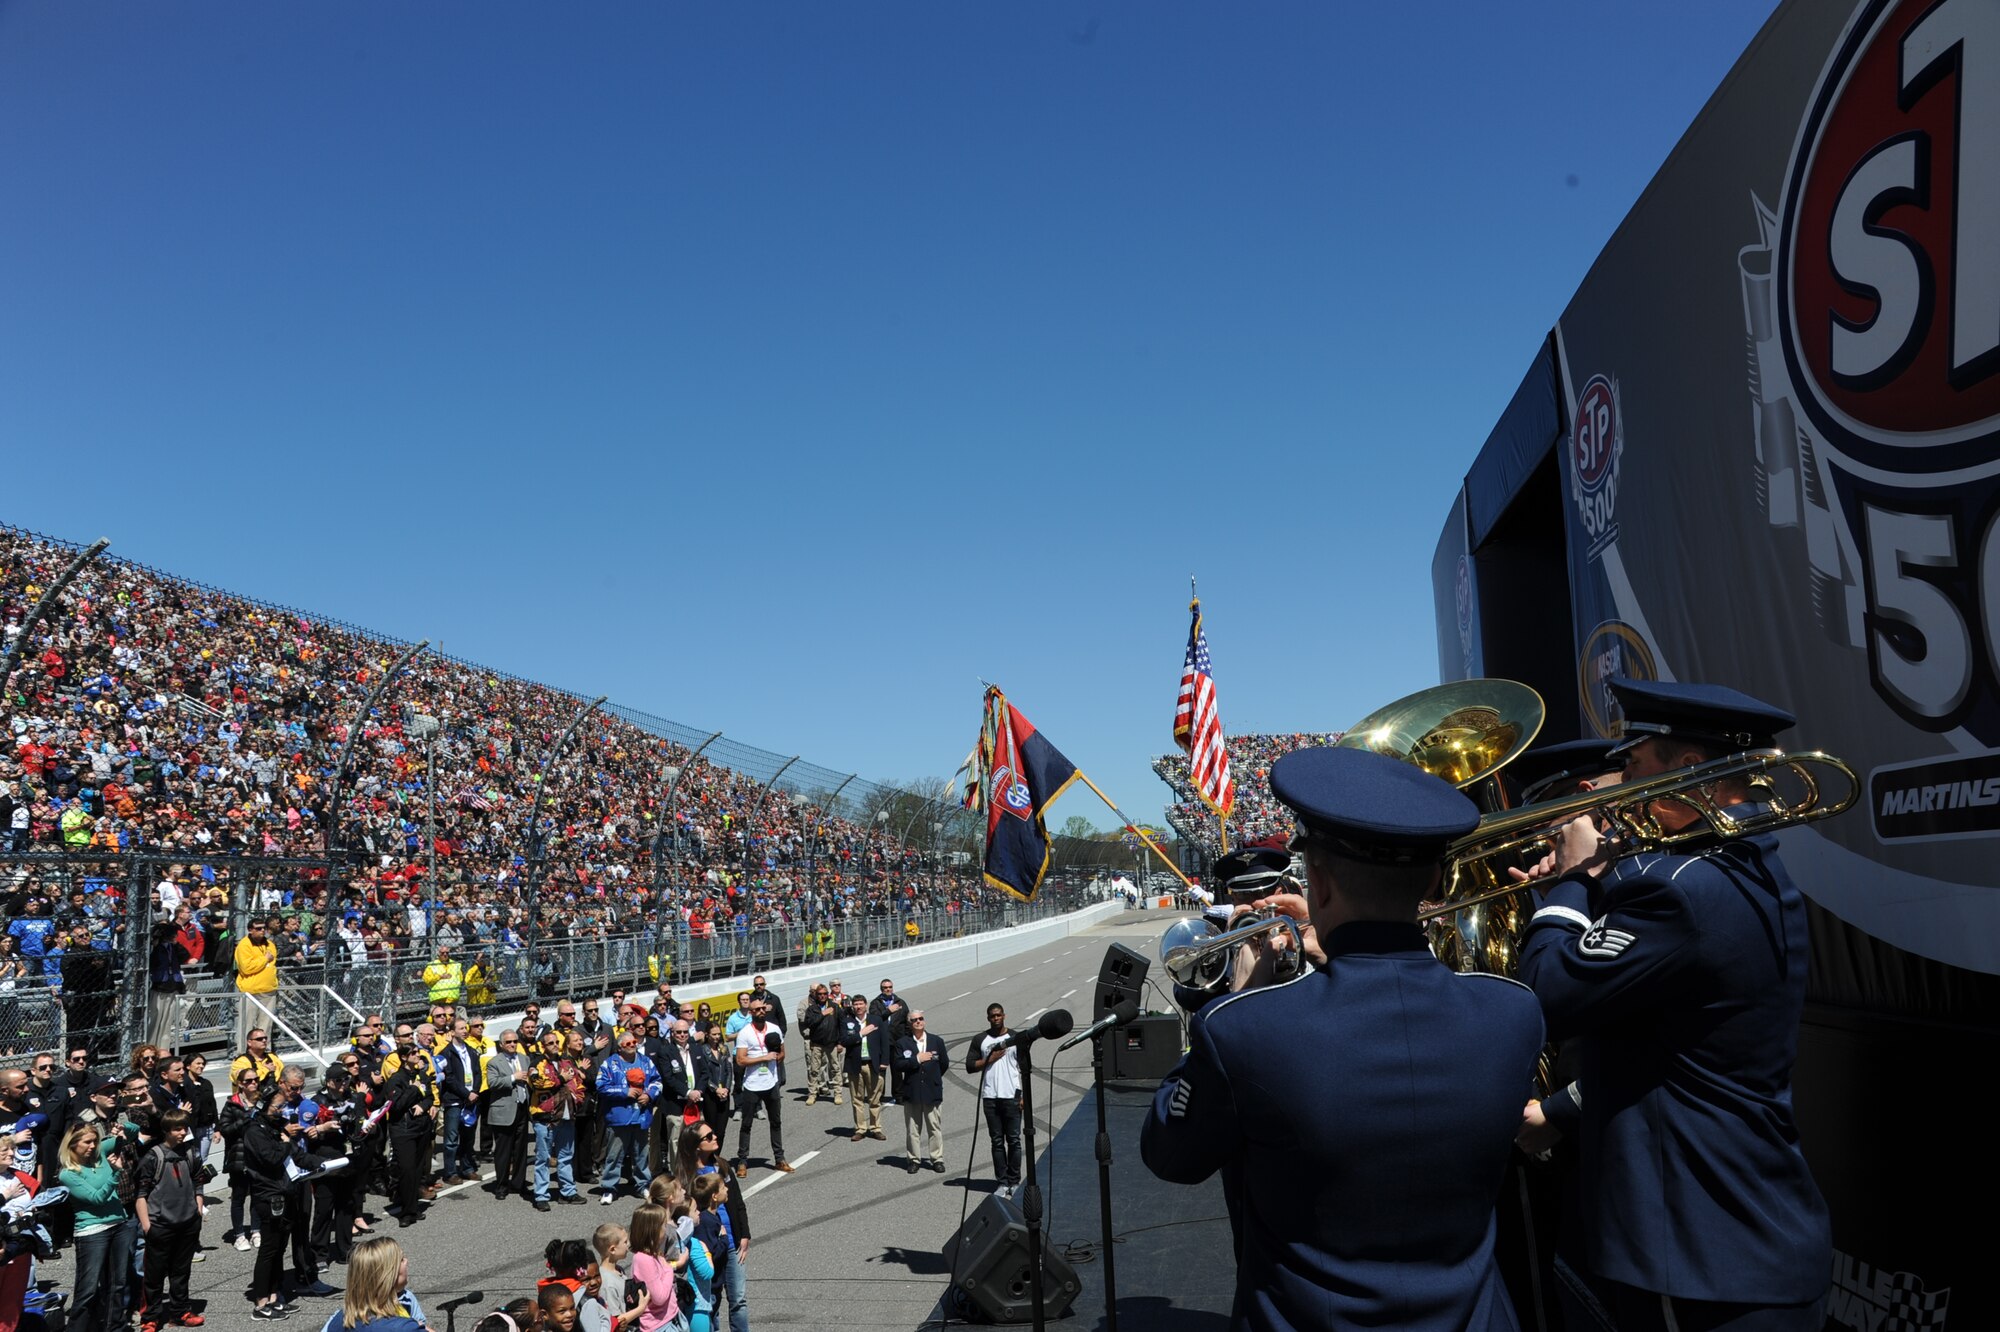 U.S. Air Force Heritage of America Band, Full Spectrum and Heritage Brass perform for NASCAR fans at Martinsville, Va., April 3, 2016. The band’s performances are specifically a part of a Public Affairs Community Outreach and Recruiting mission, which also coincided with the commemoration of the 50th anniversary of the Vietnam War. (U.S. Air Force photo by Staff Sgt. William Anger/Released)

